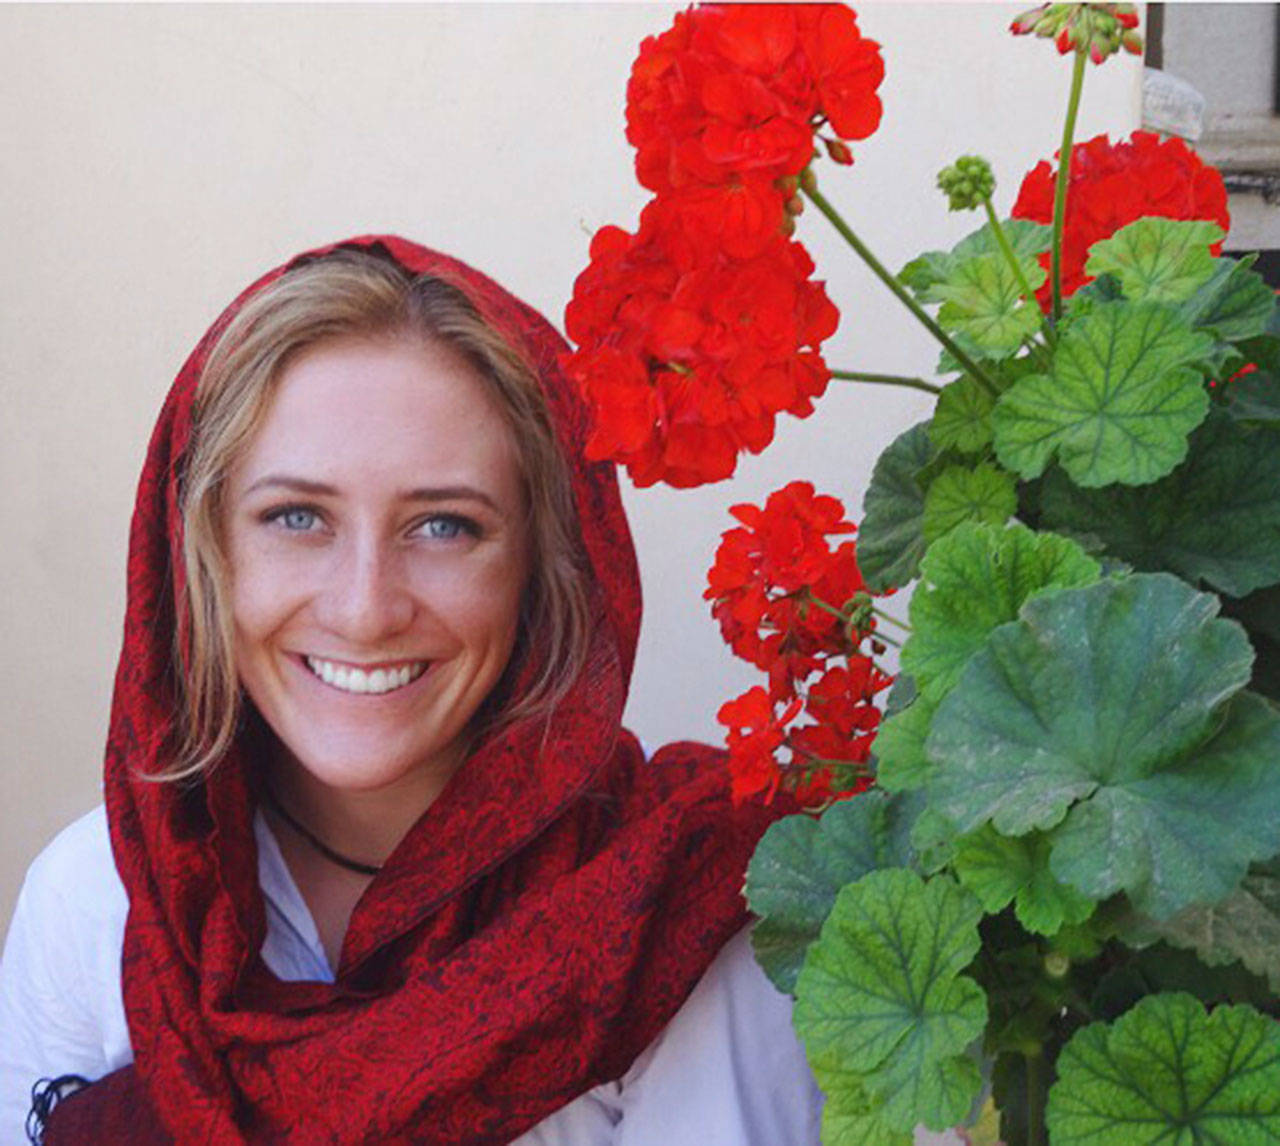 Leah Blanchard spent six weeks learning Arabic and immersing herself in the culture of North Africa. Submitted photos.